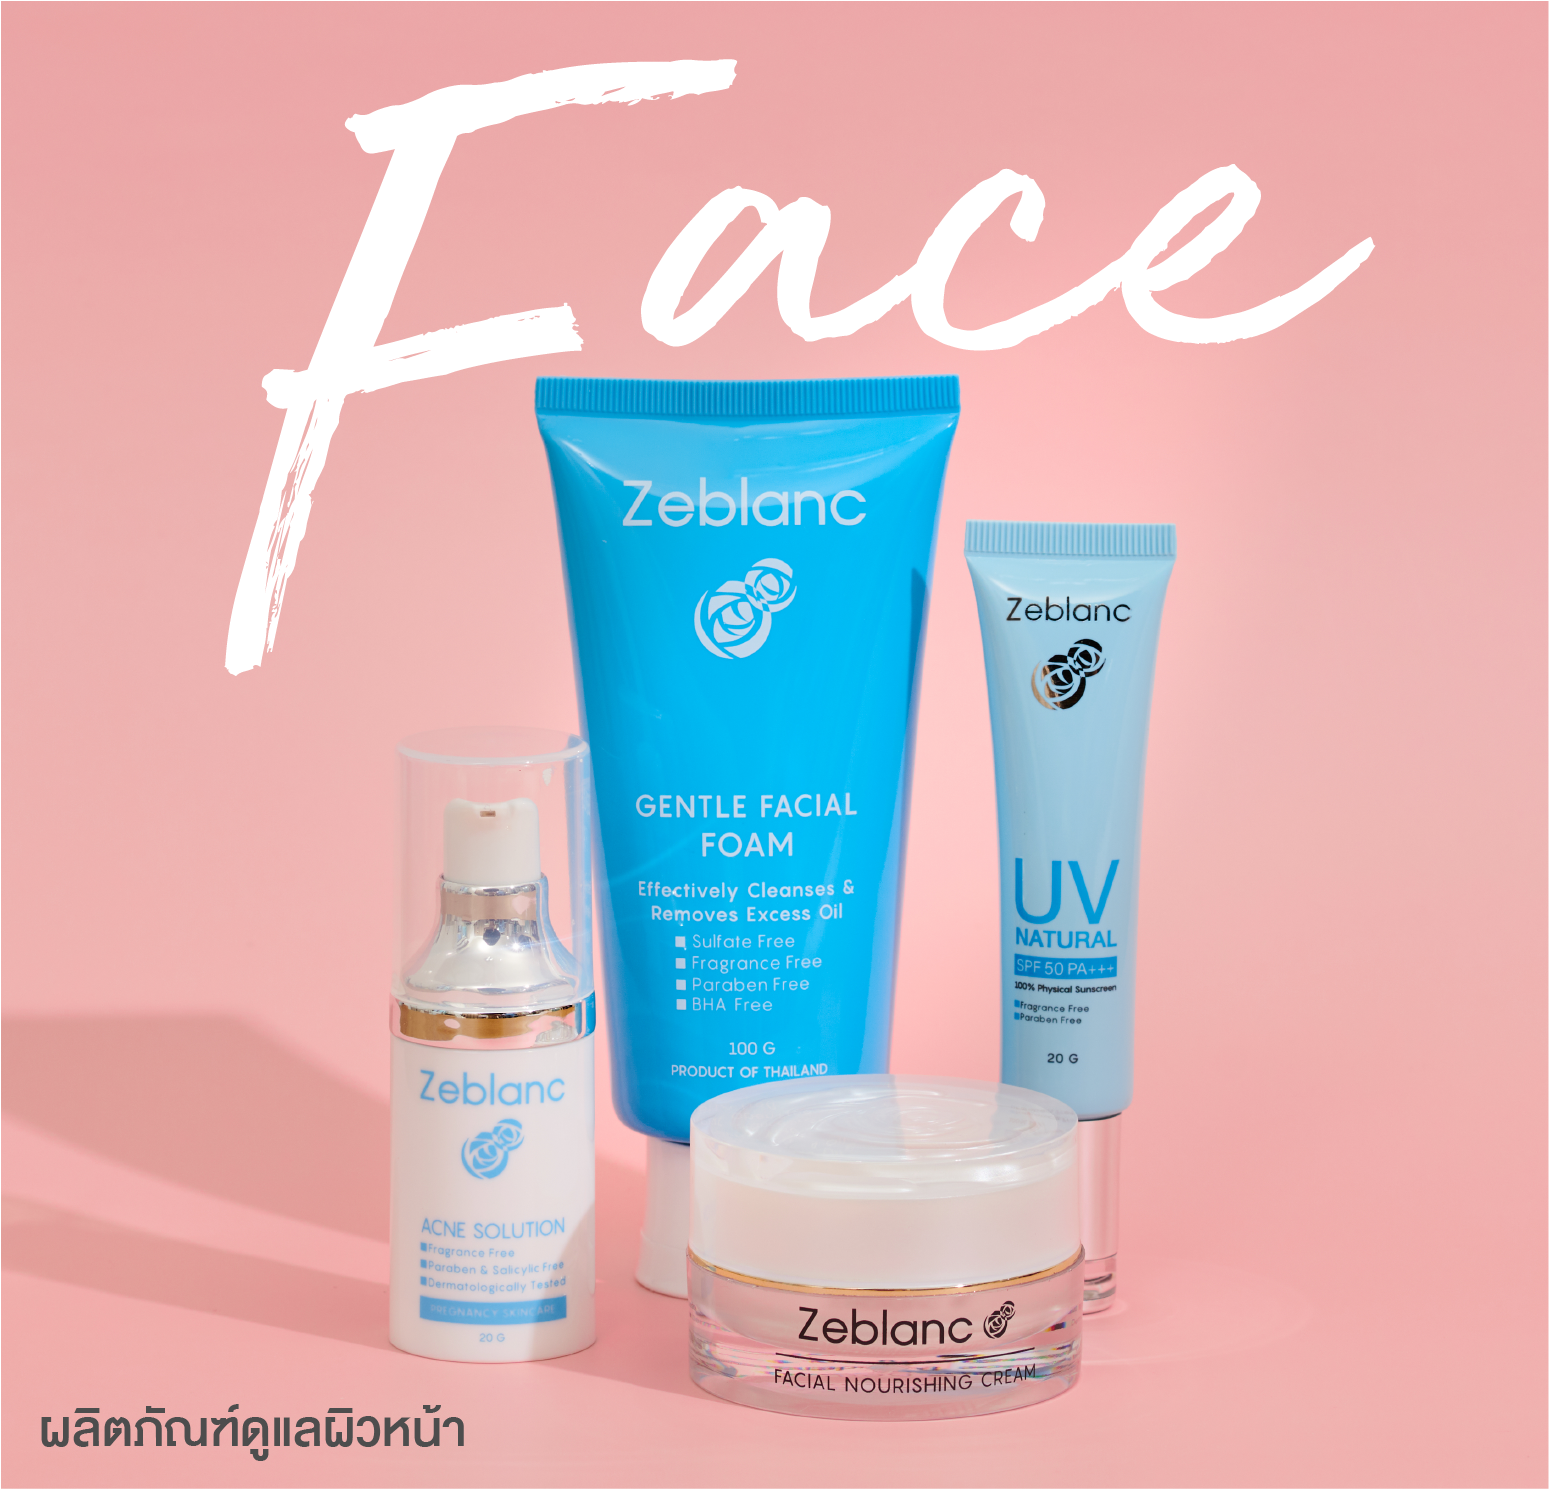 Facial skincare products